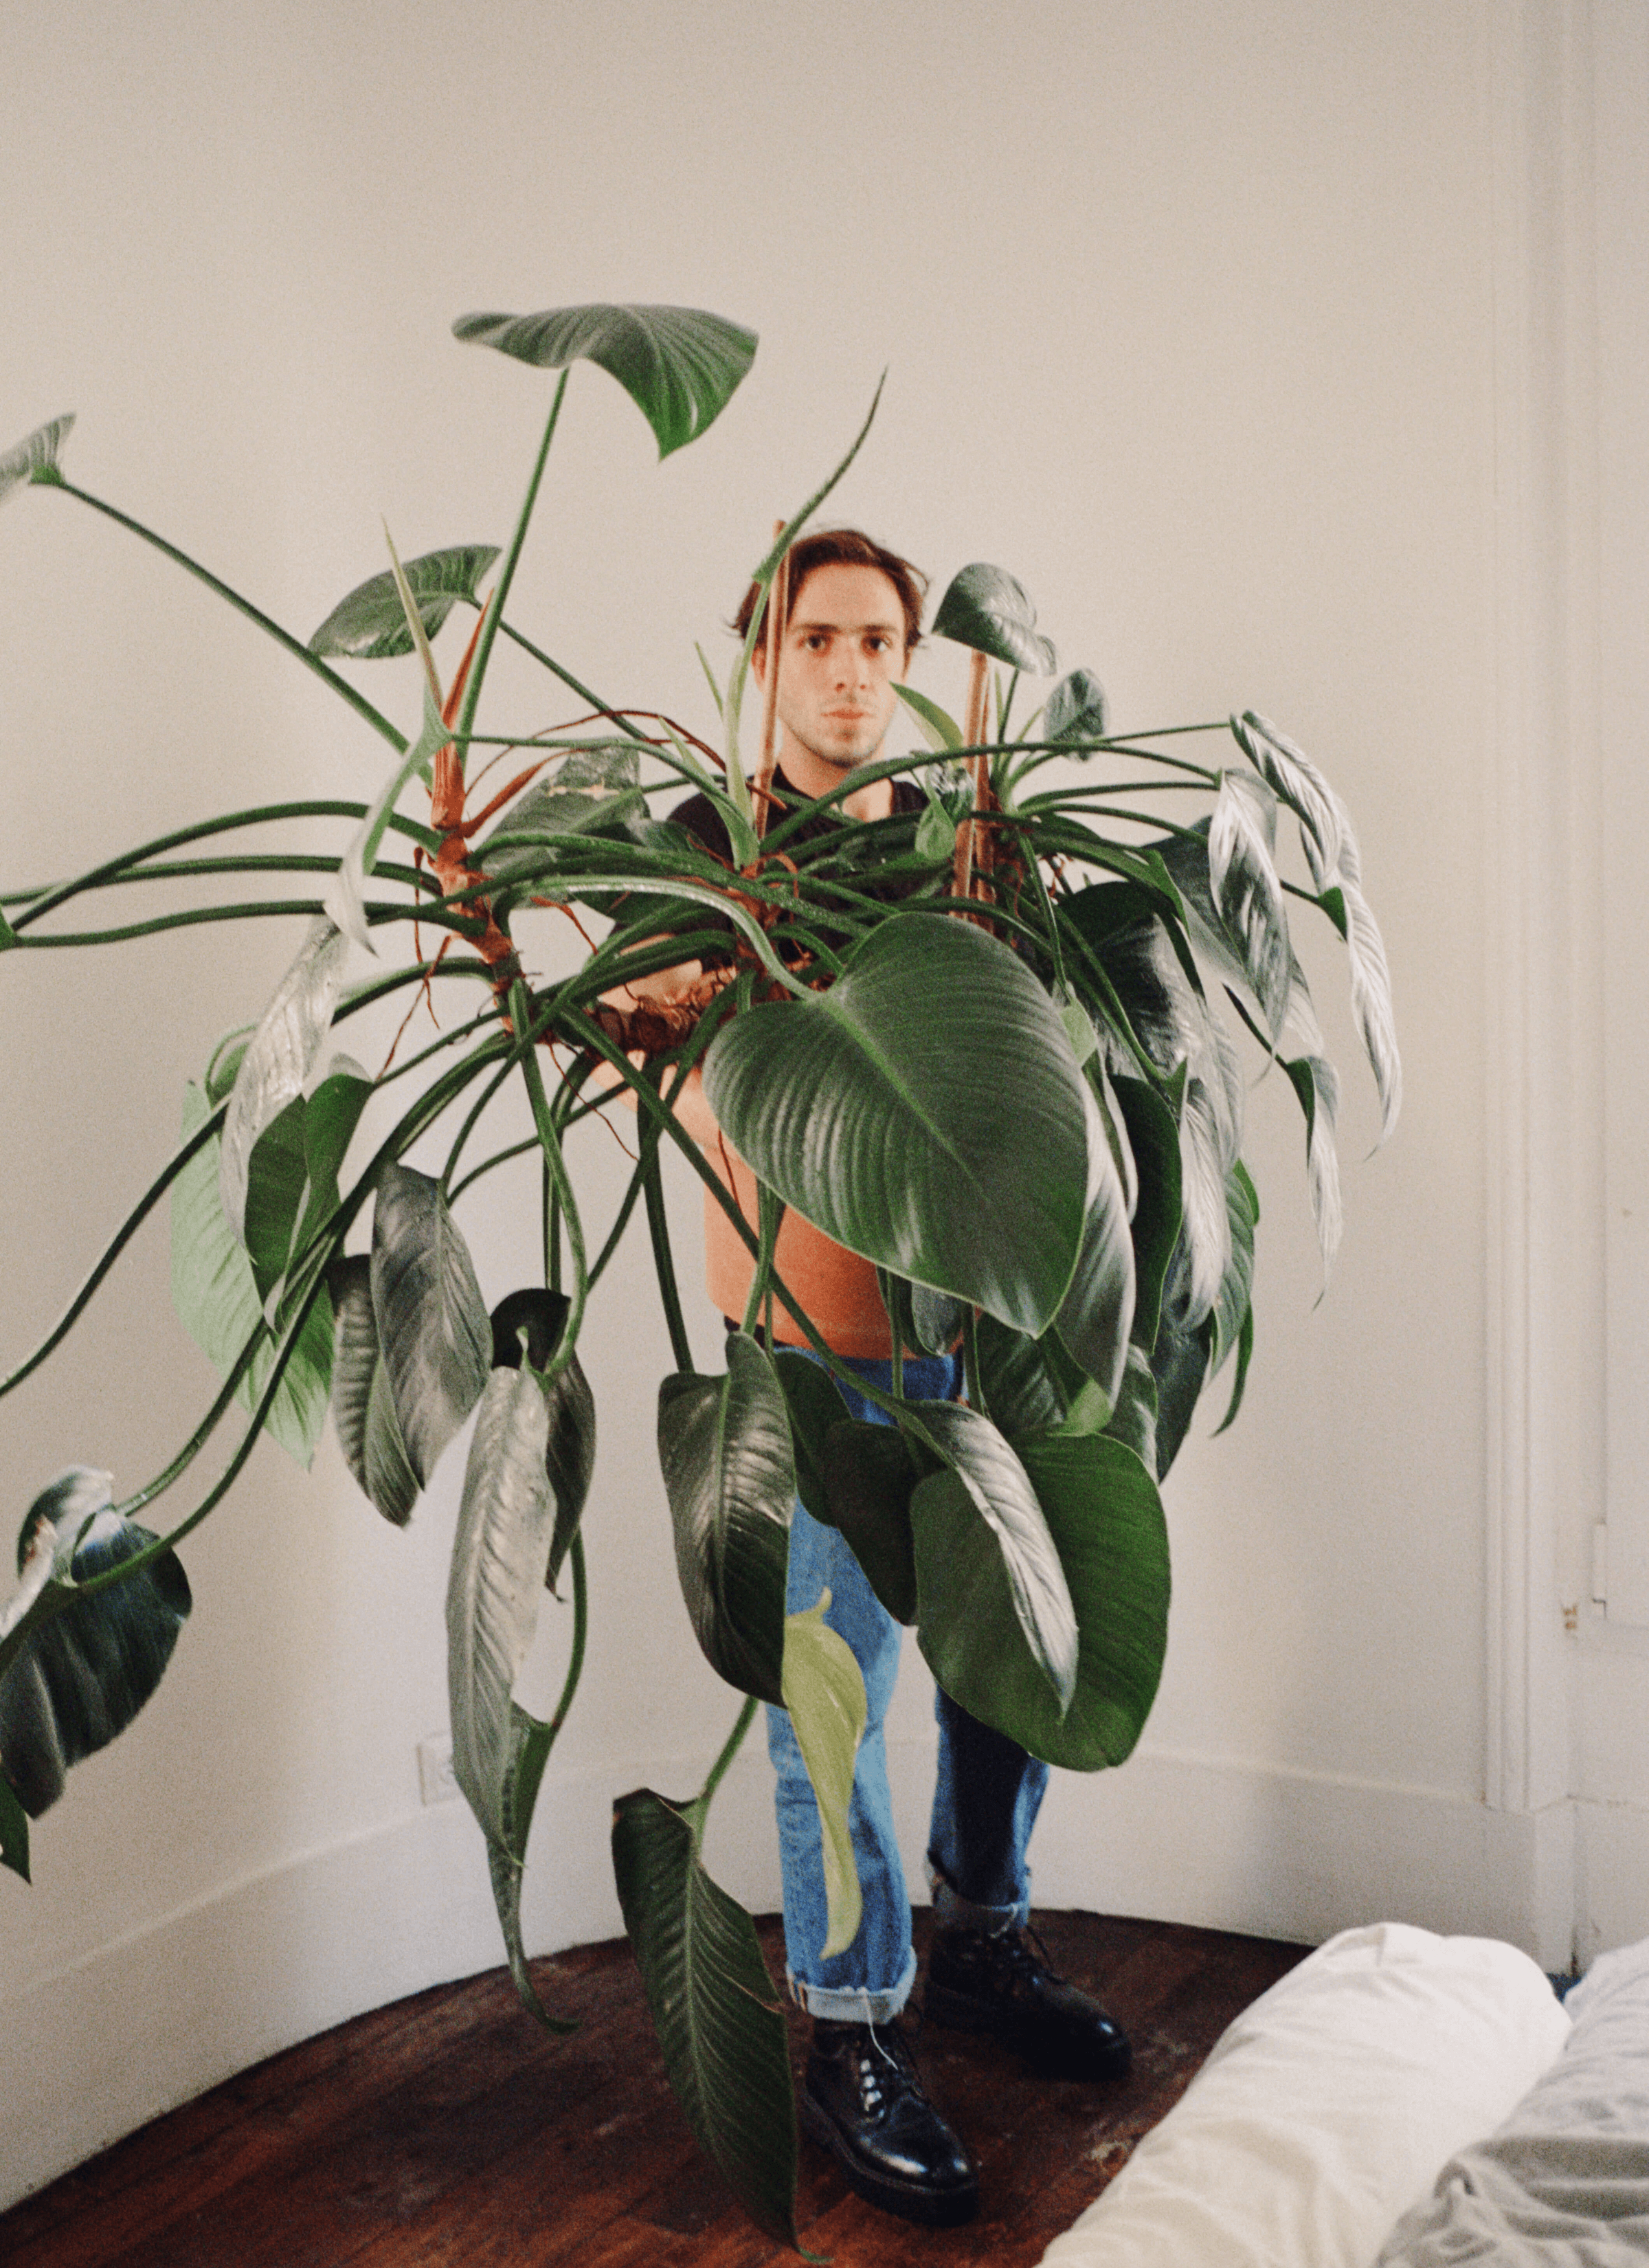 Toni holds a potted Philodendron erubescens in the corner of the room and have a photoshoot with it.